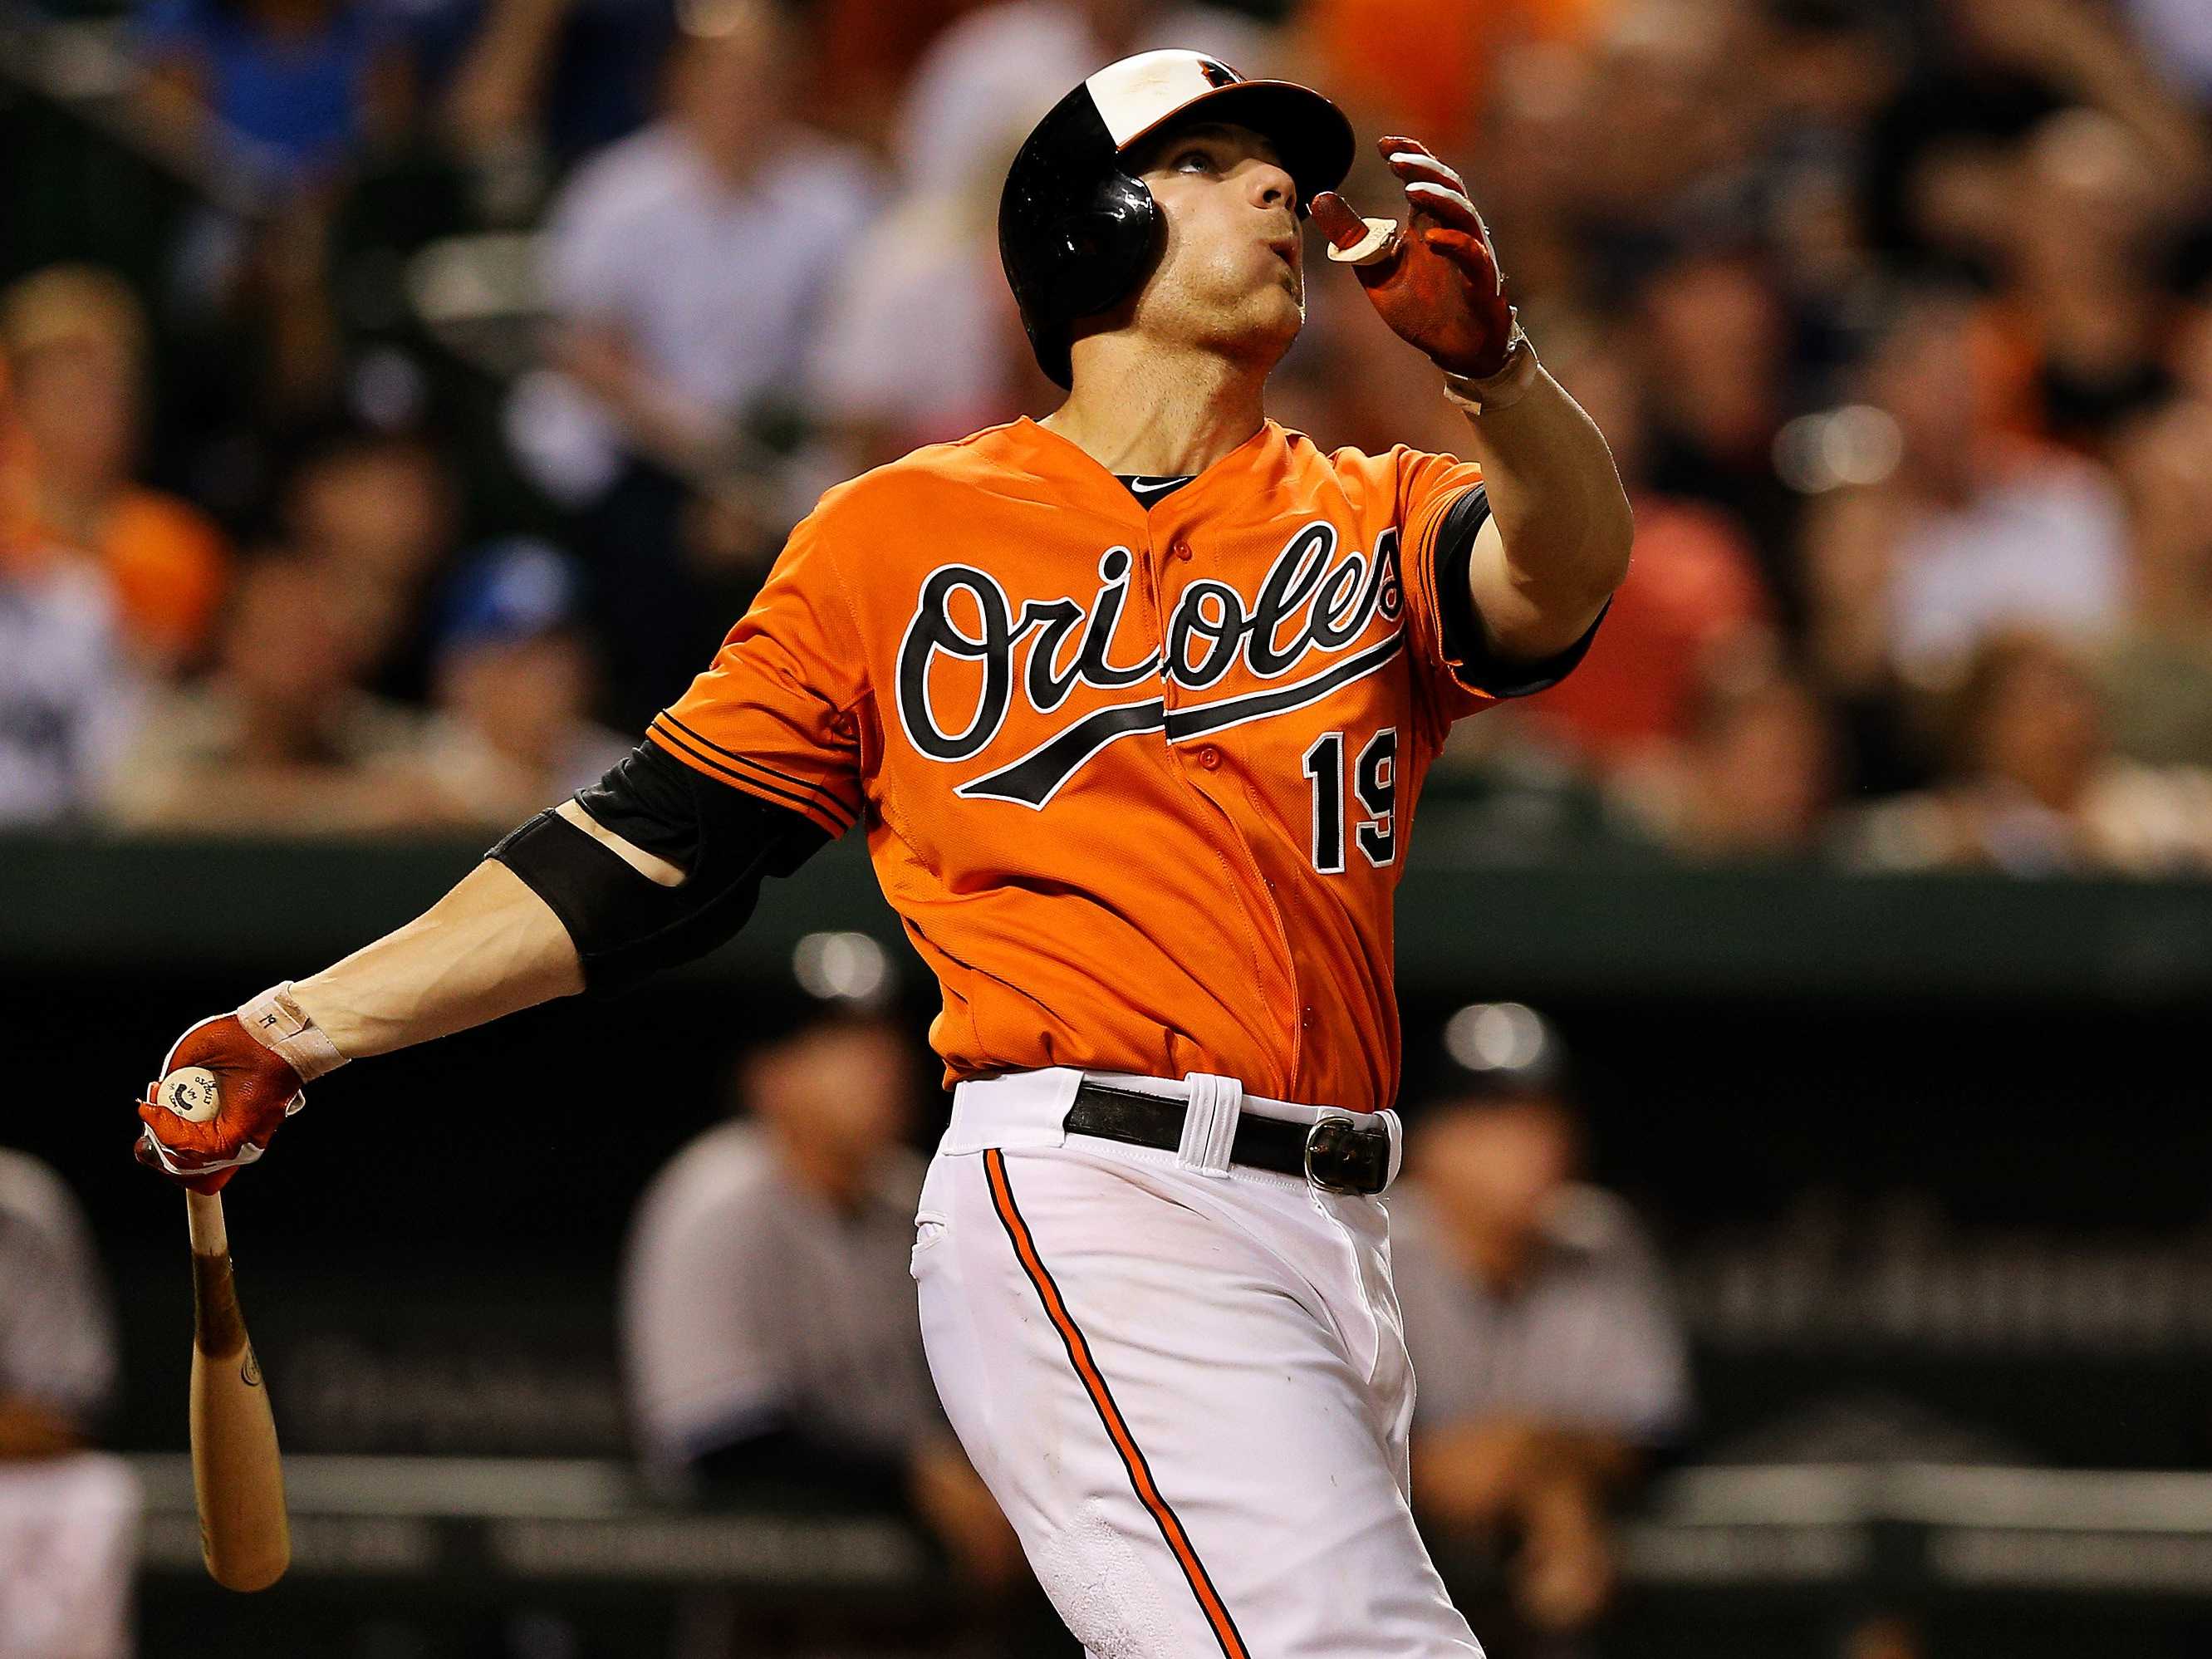 Expectations For Chris Davis? Sports and Life